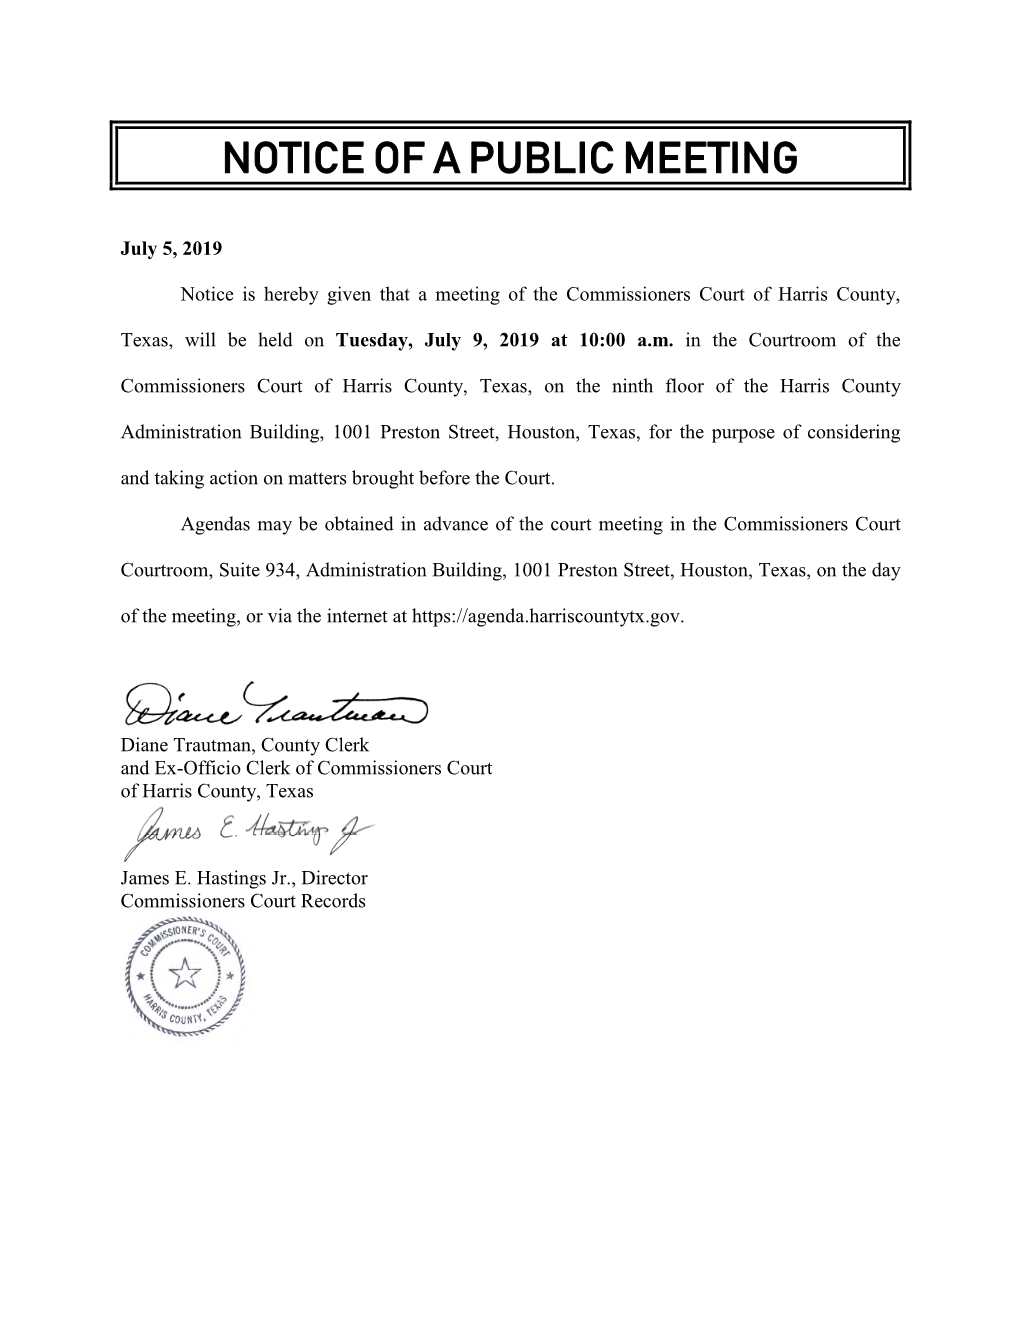 Agendas May Be Obtained in Advance of the Court Meeting in the Commissioners Court